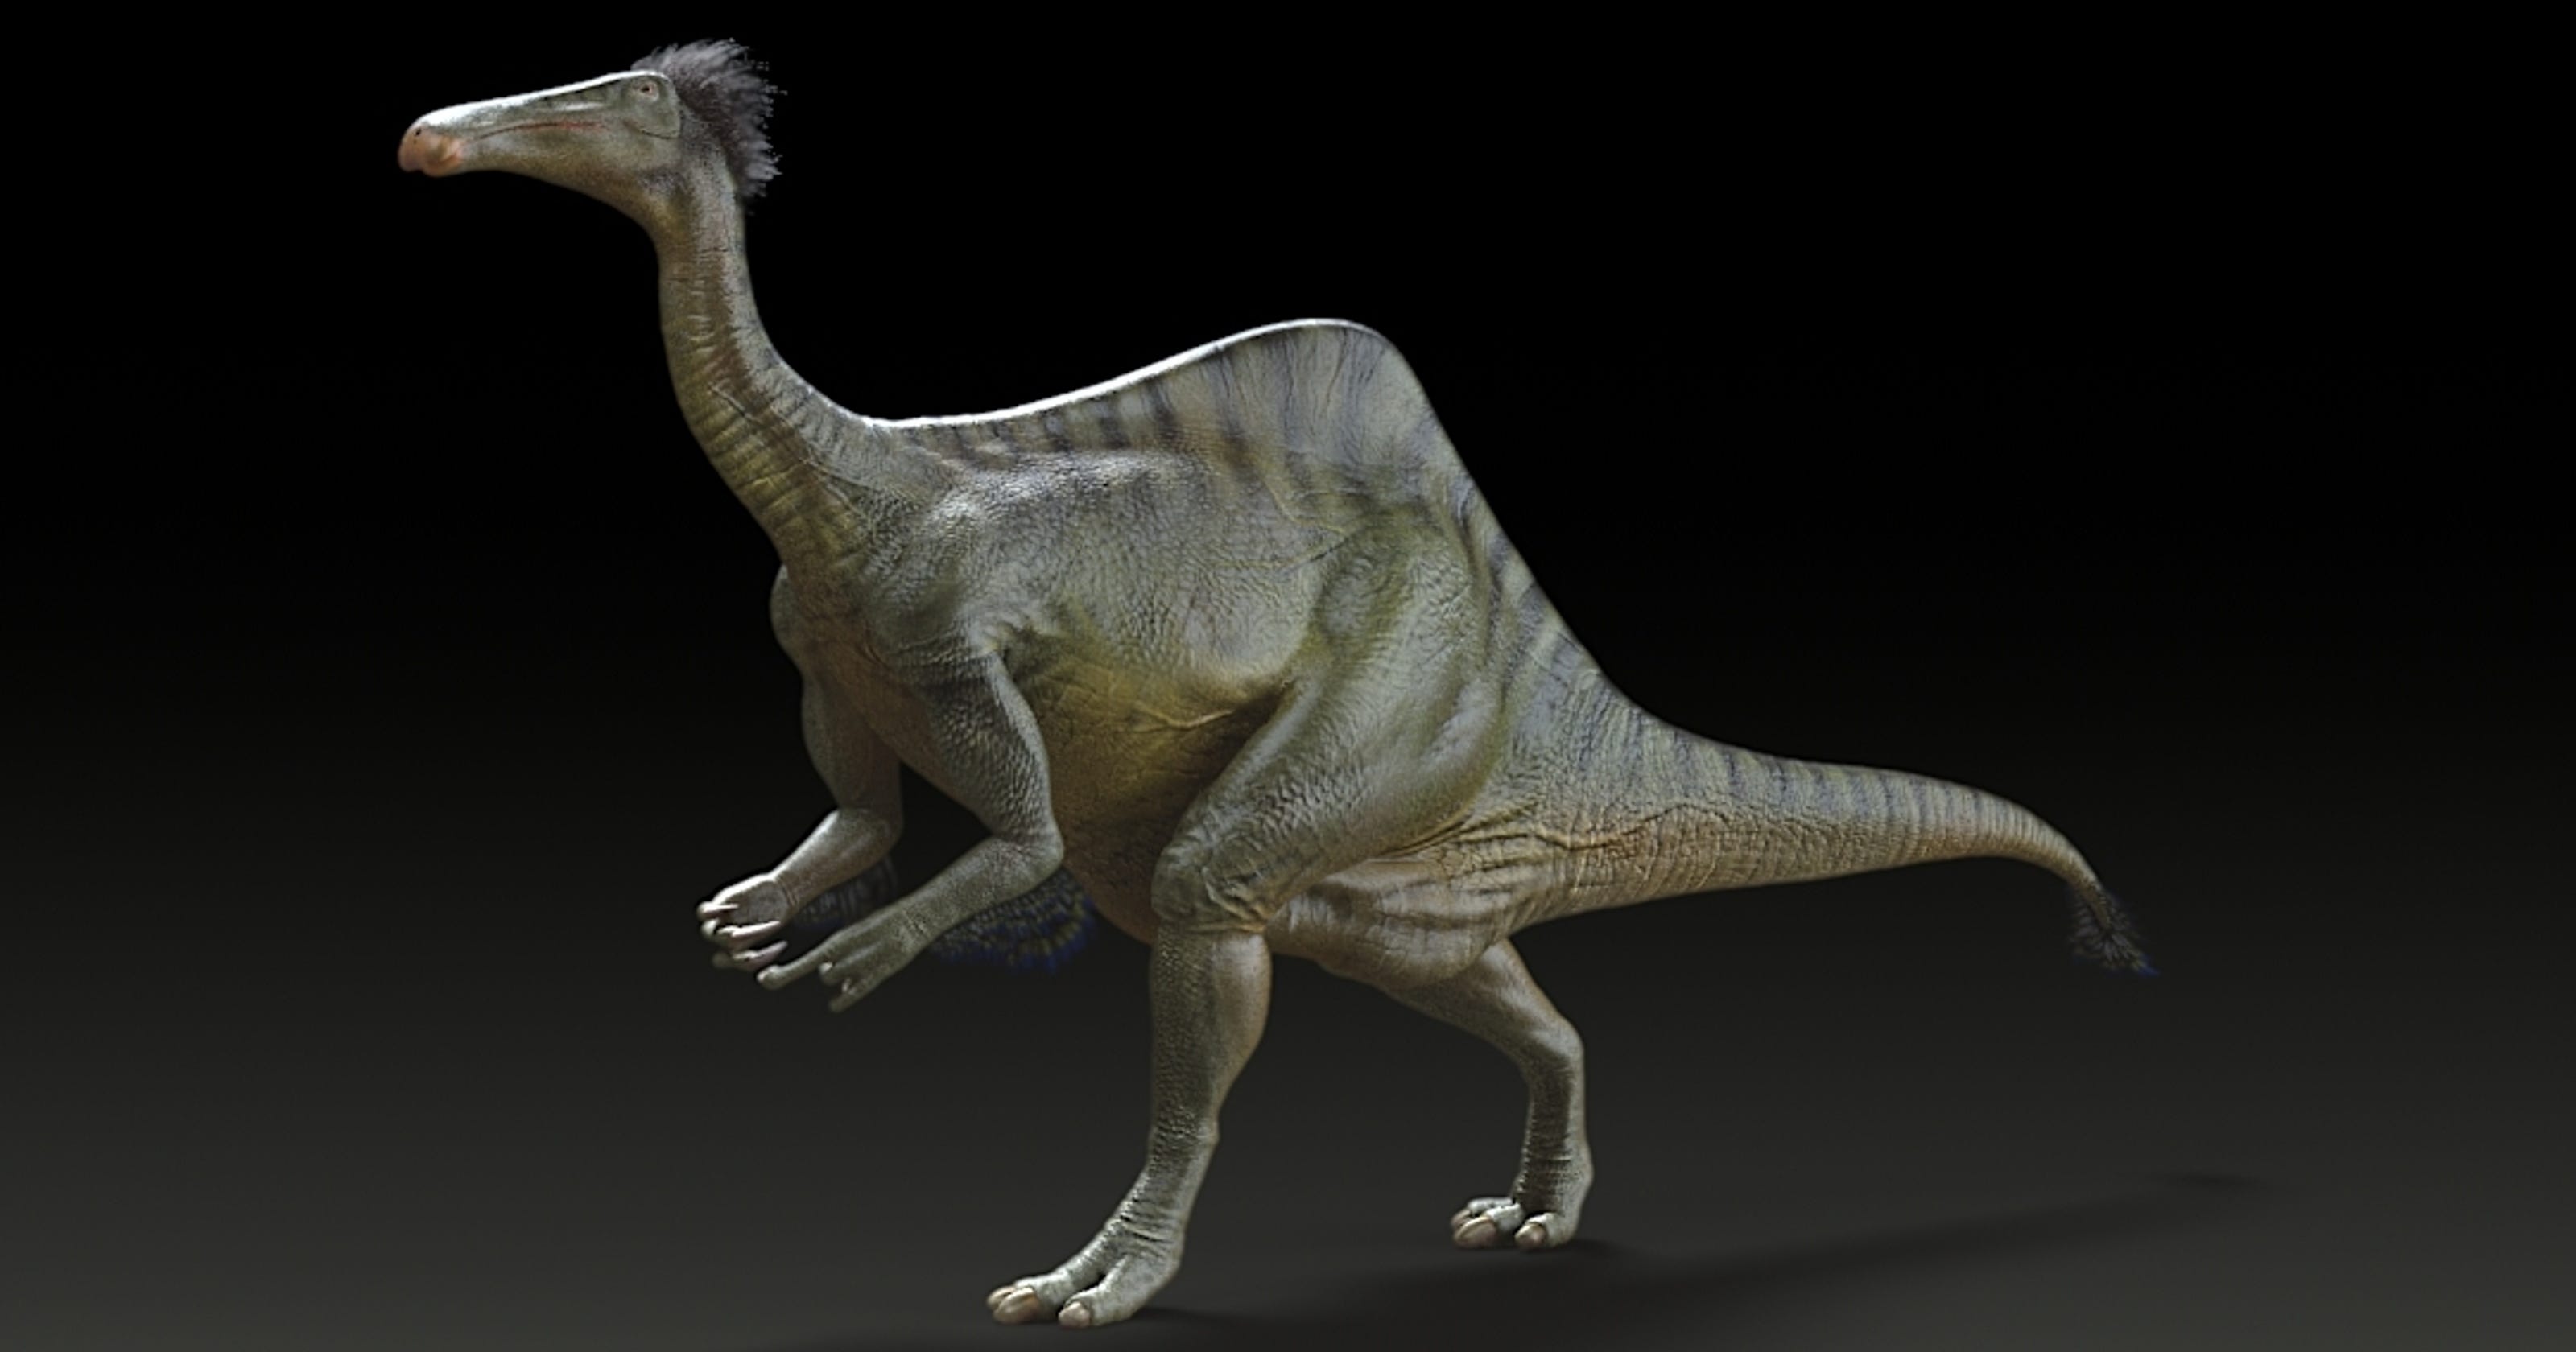 Mystery solved monster dinosaur  had 8 foot arms weighed 